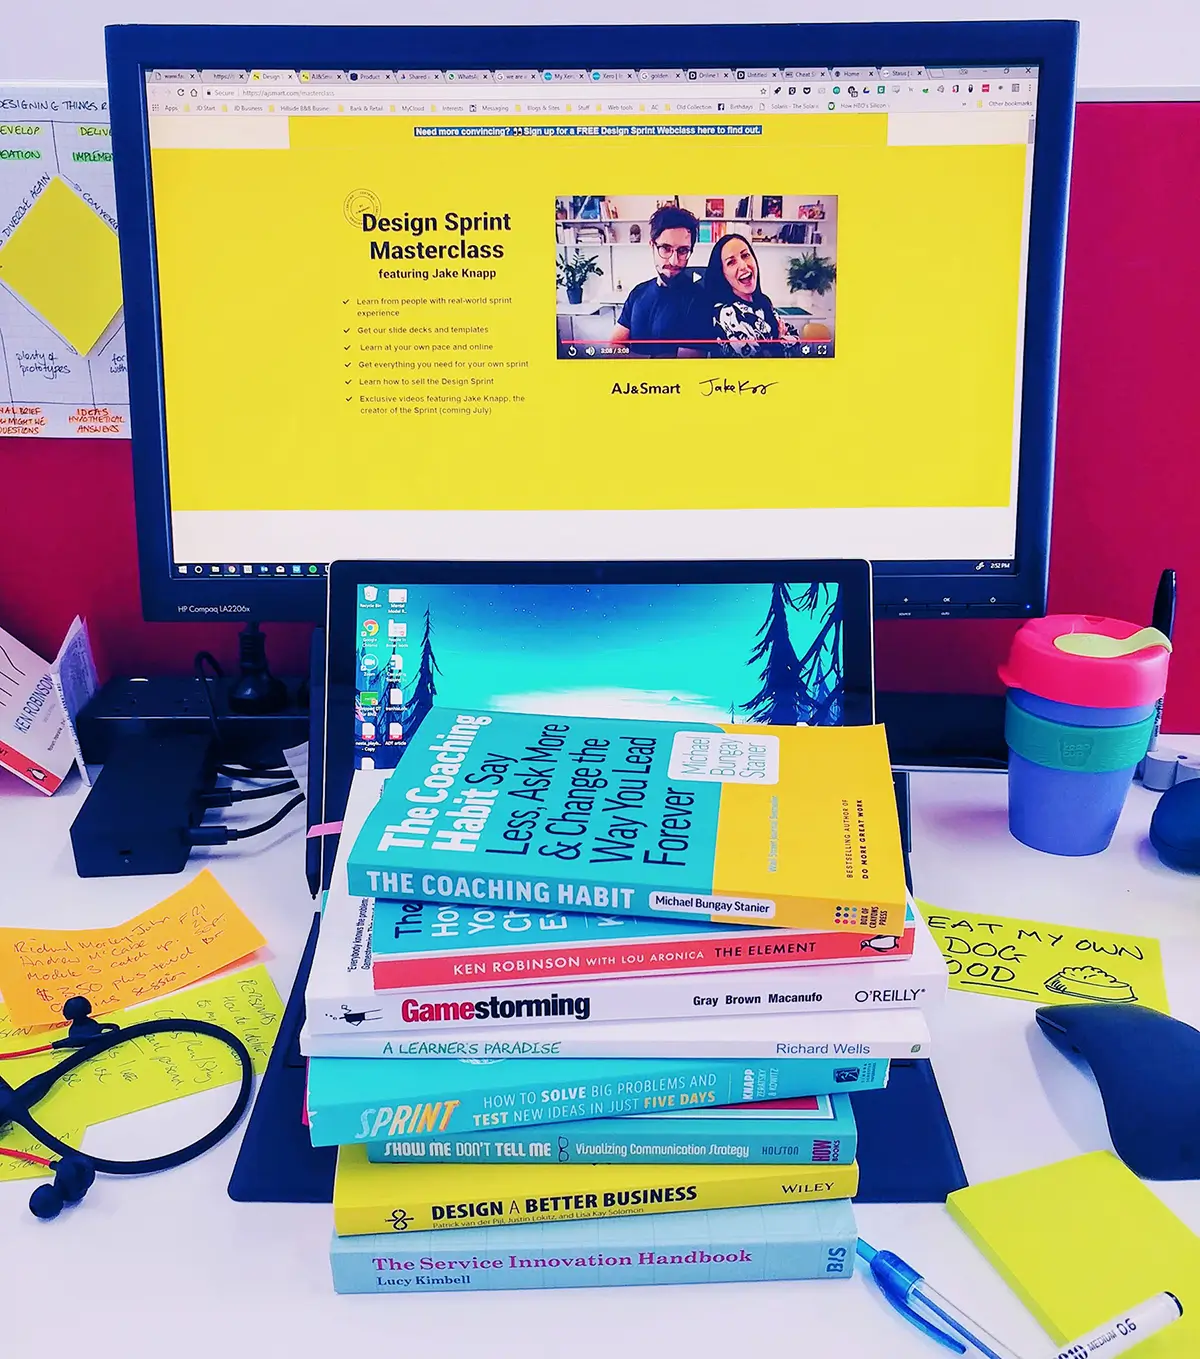 A computer screen shows a design sprint website on the screen. A pile of books on this subject are stacked on the desk in front of the screen.